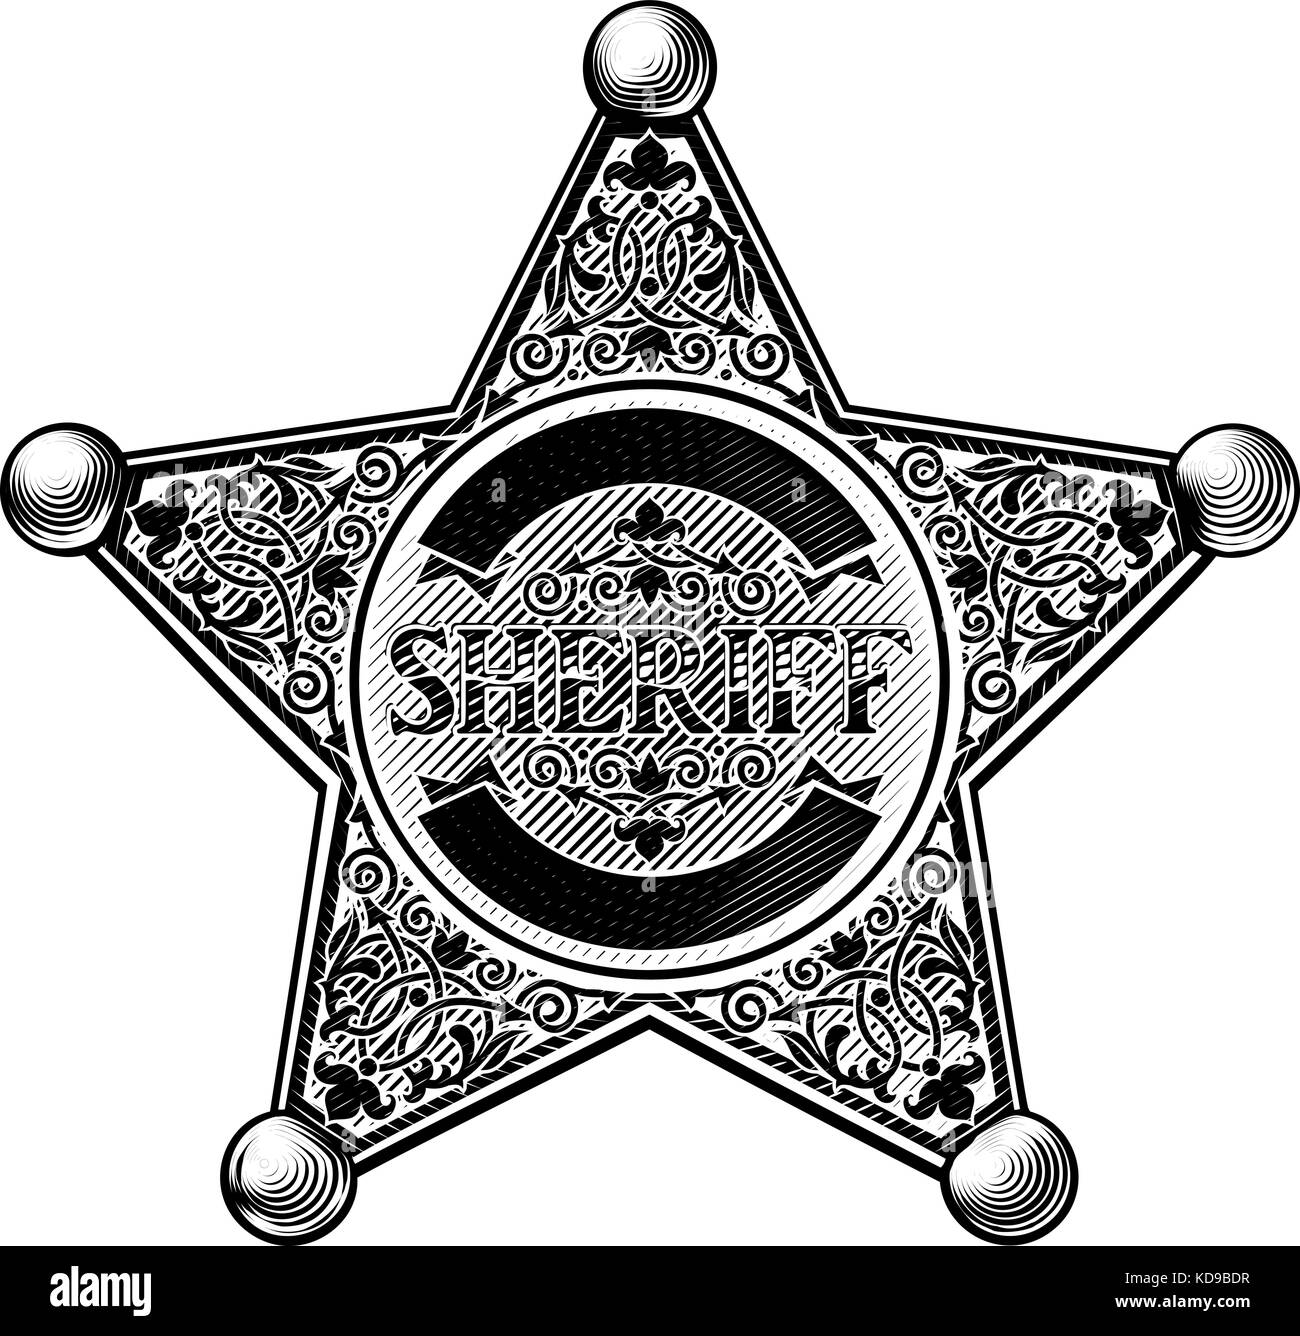 Sheriff Star Badge Etched Style Stock Vector